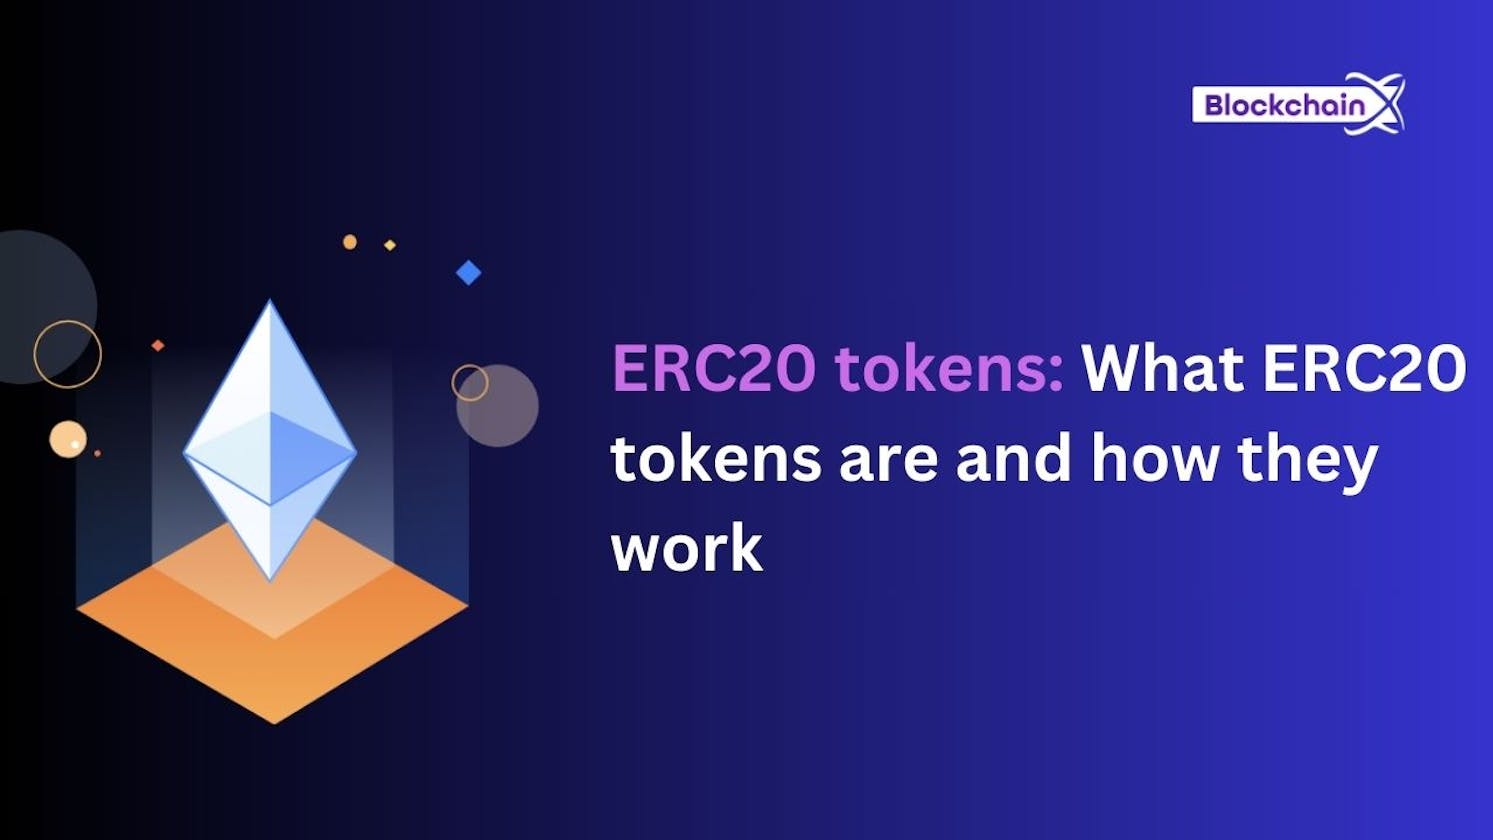 ERC20 tokens: What ERC20 tokens are and how they work